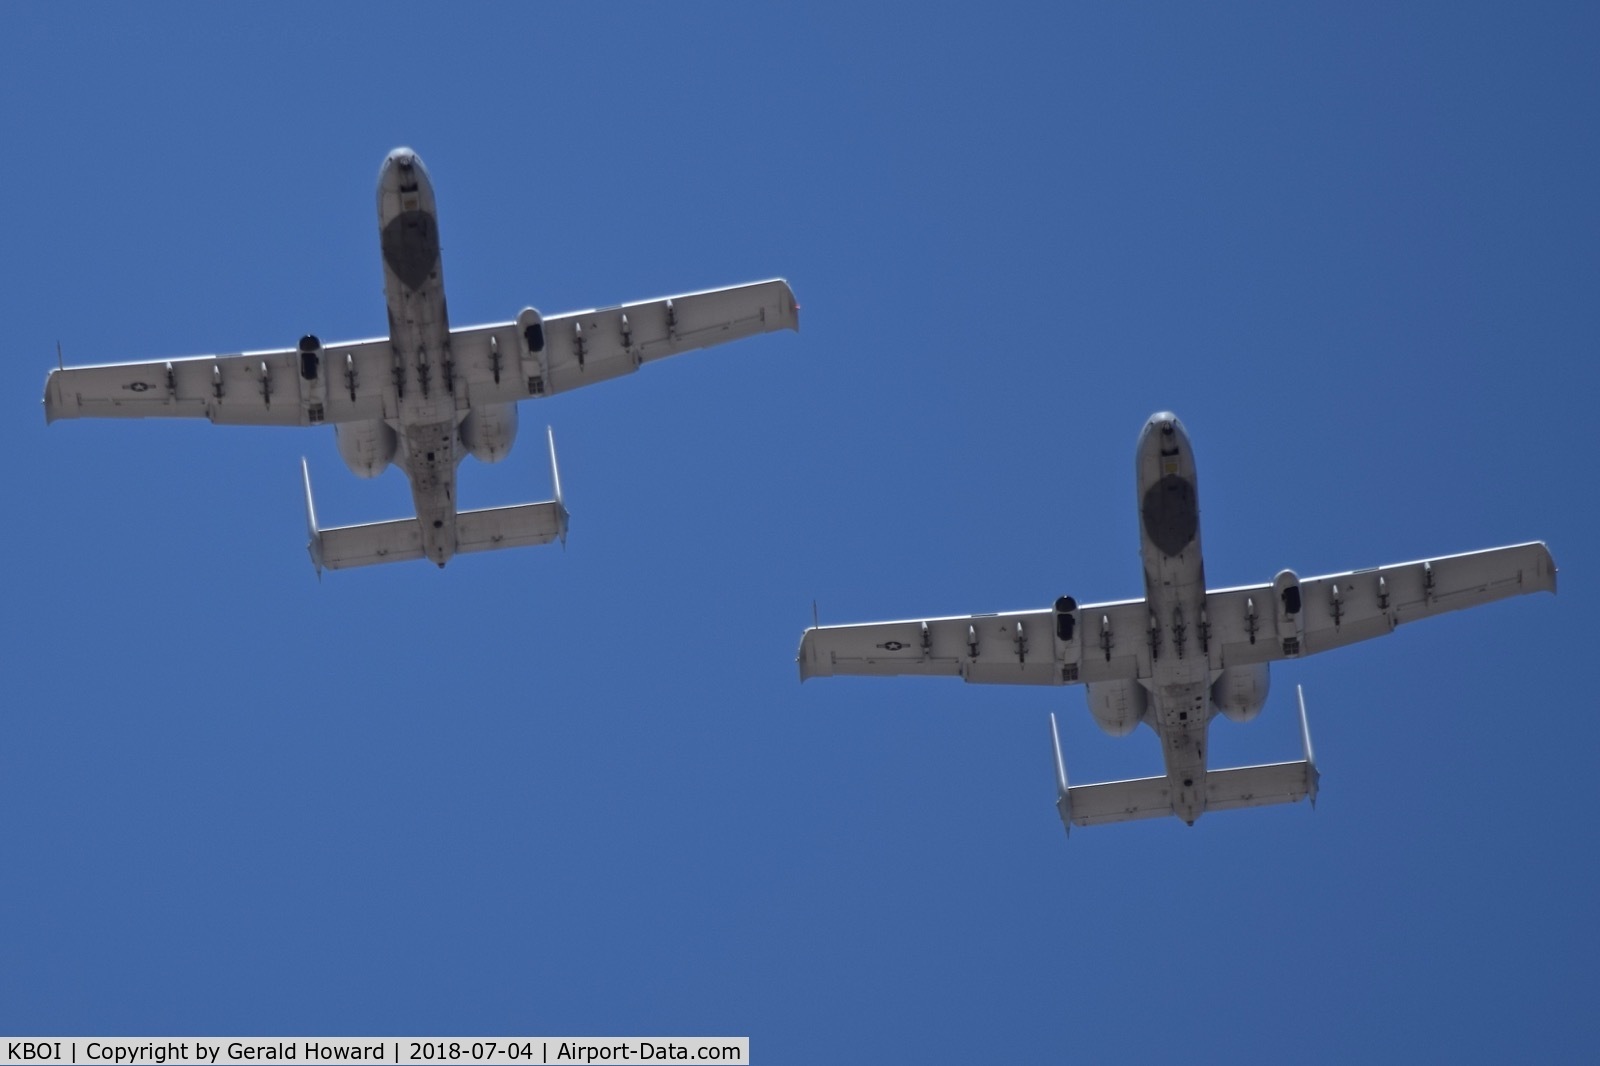 Boise Air Terminal/gowen Fld Airport (BOI) - Two A-10C from the 190th Fighter Sq., 124th Fighter Wing, Idaho ANG.